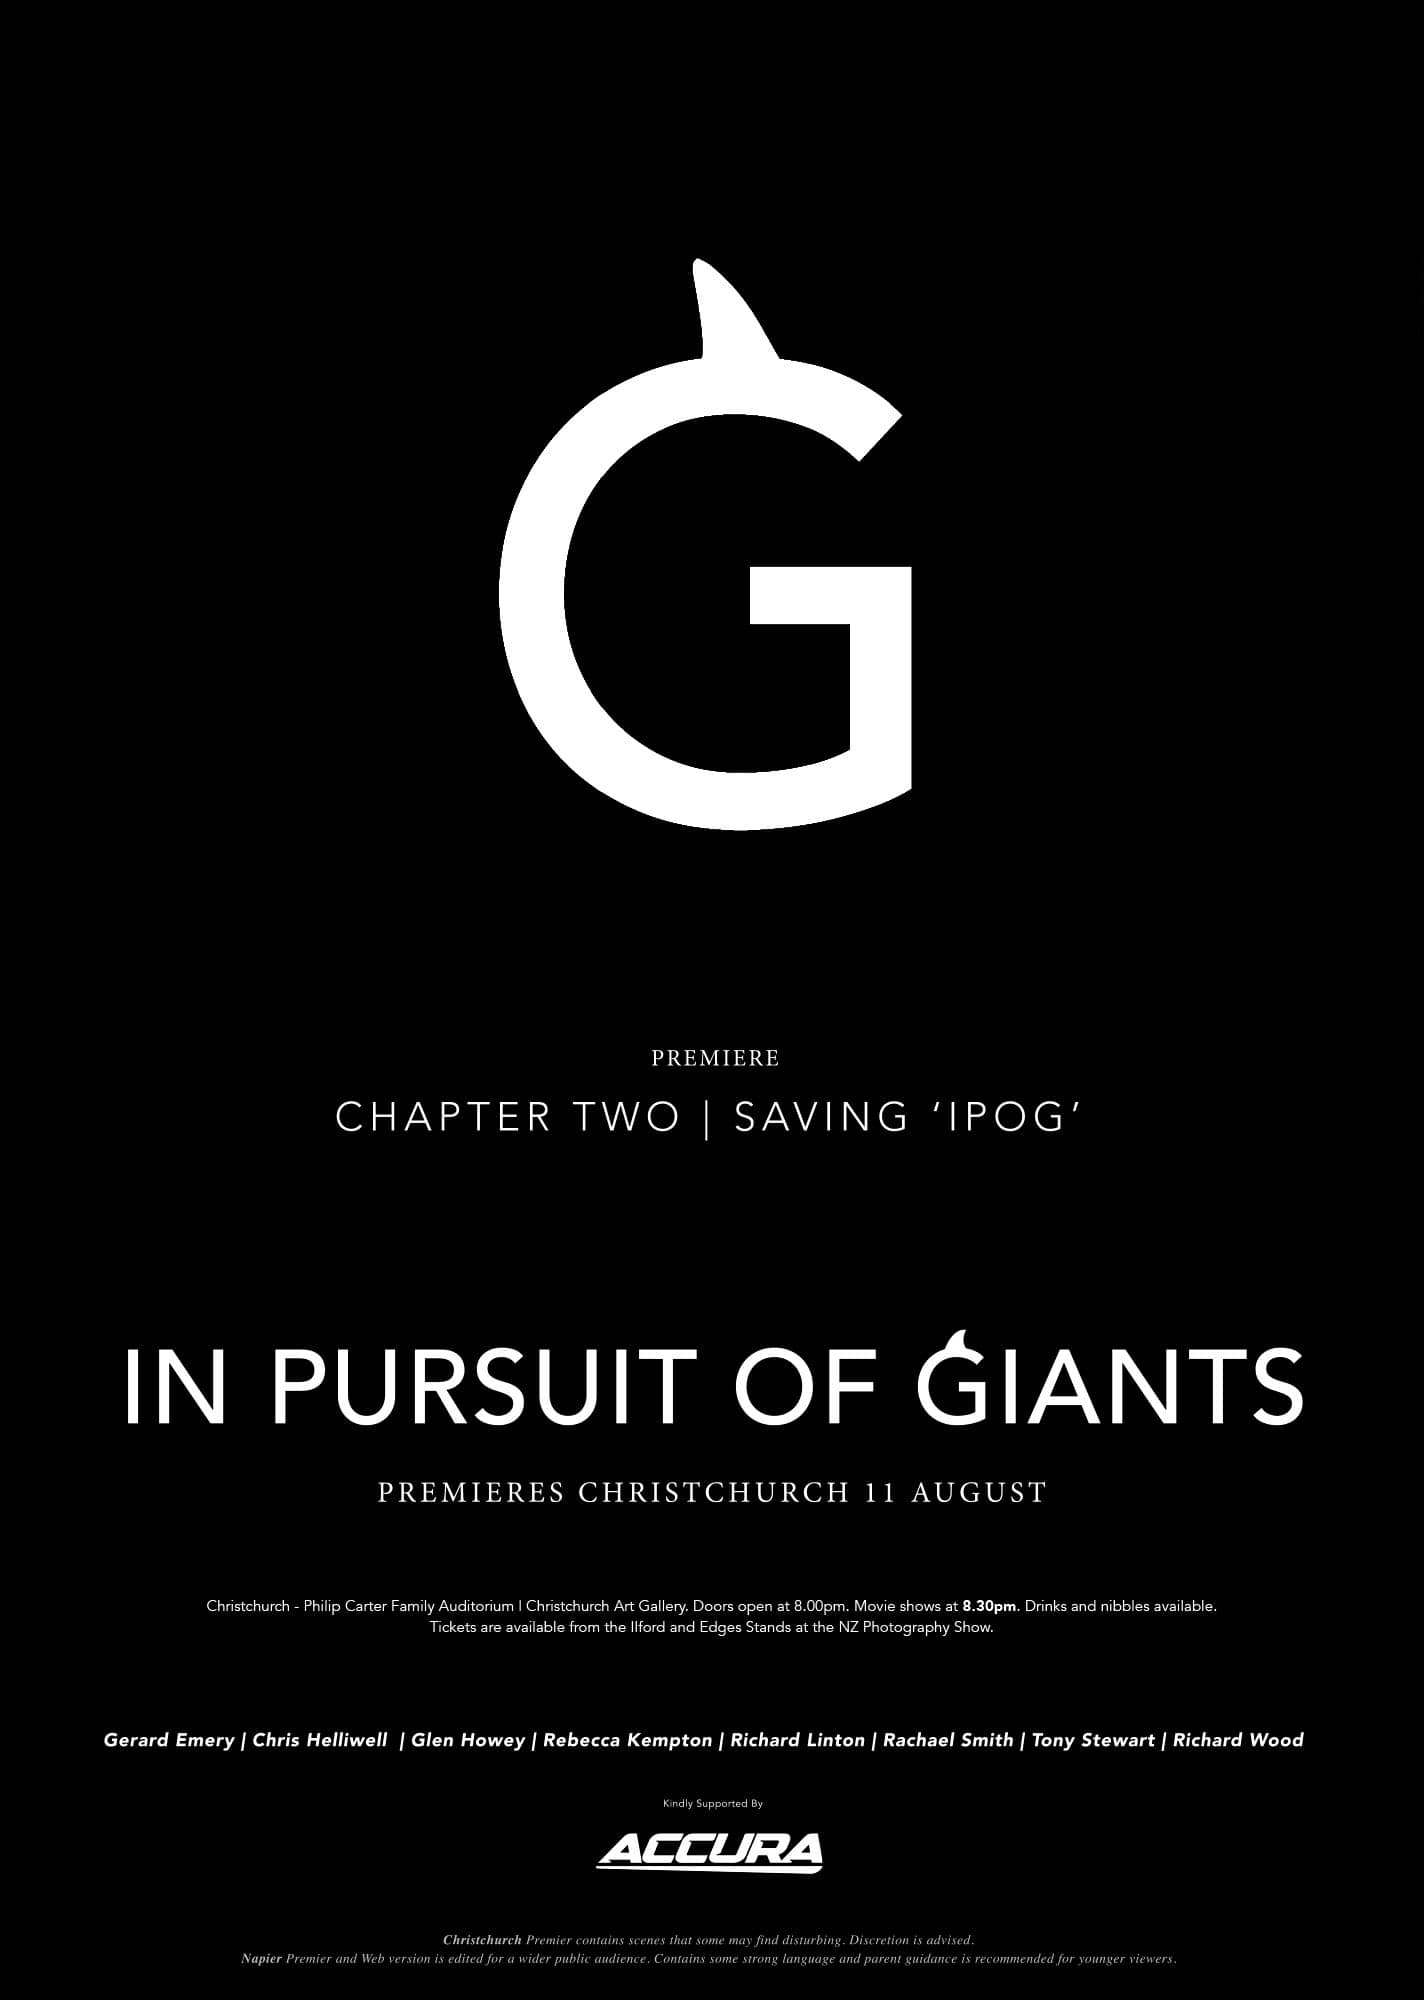 Pursuit of Giants movie premiere full banner